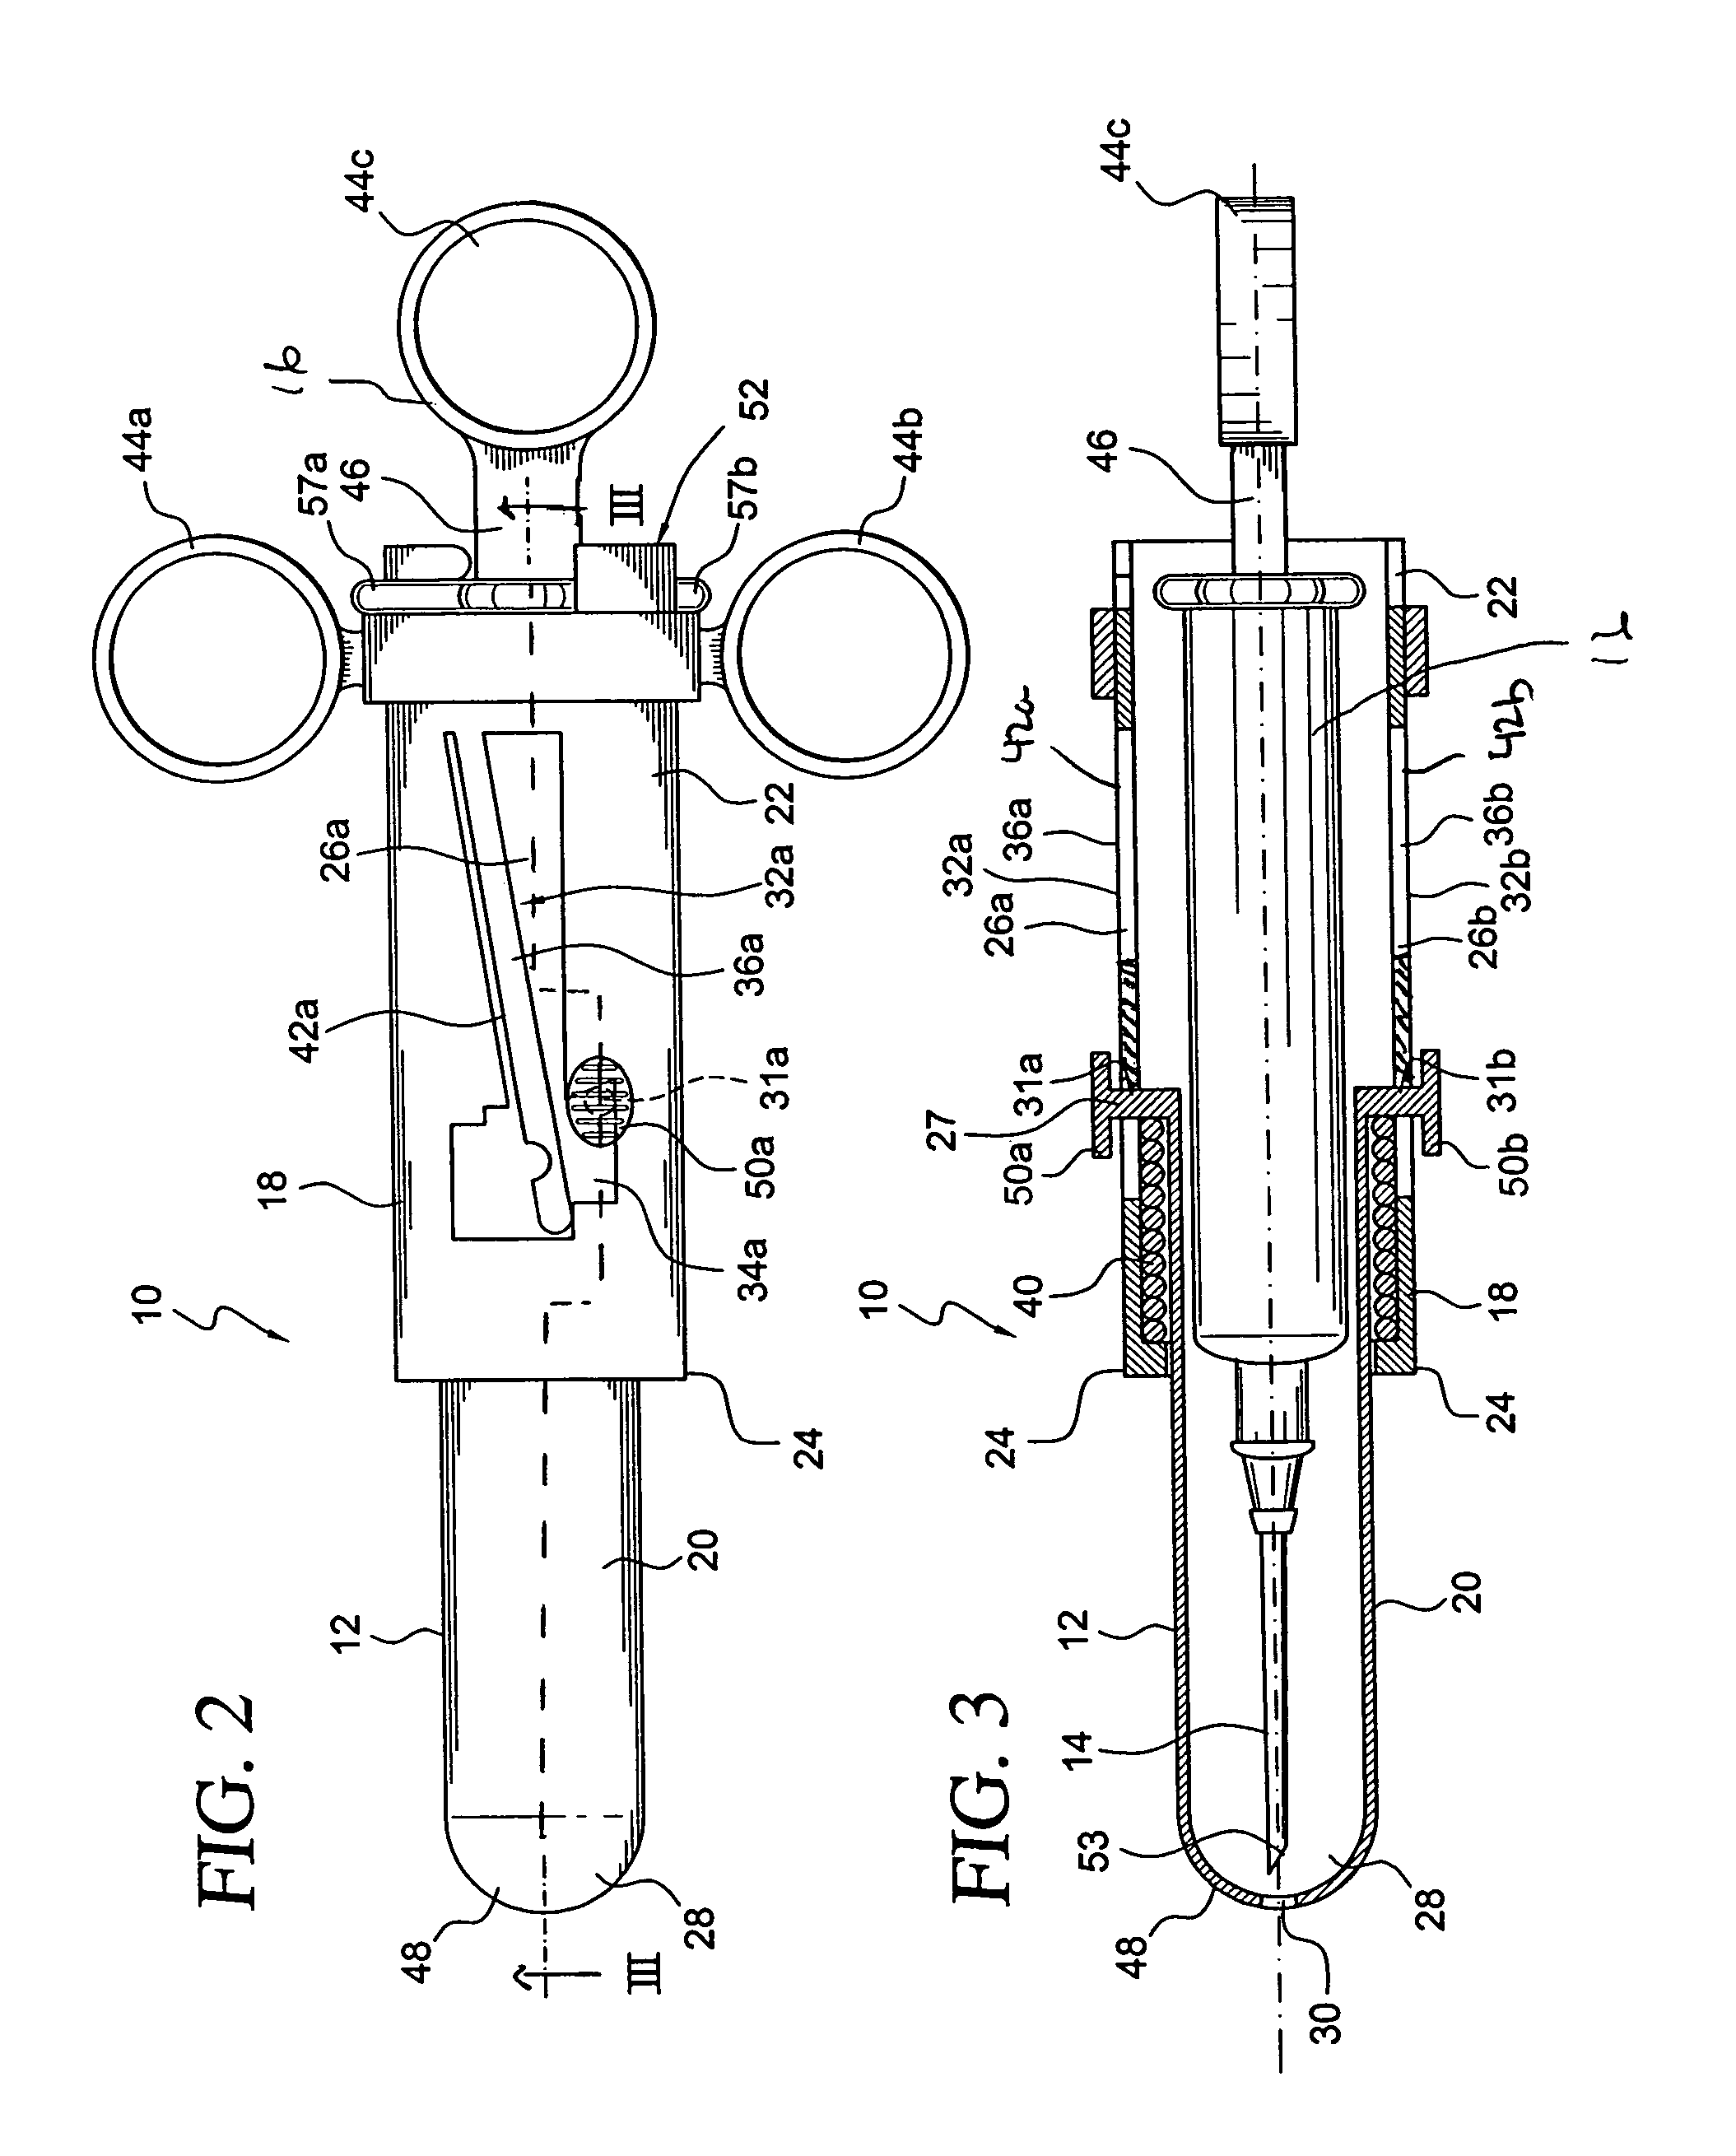 Enveloping needle stick protection device